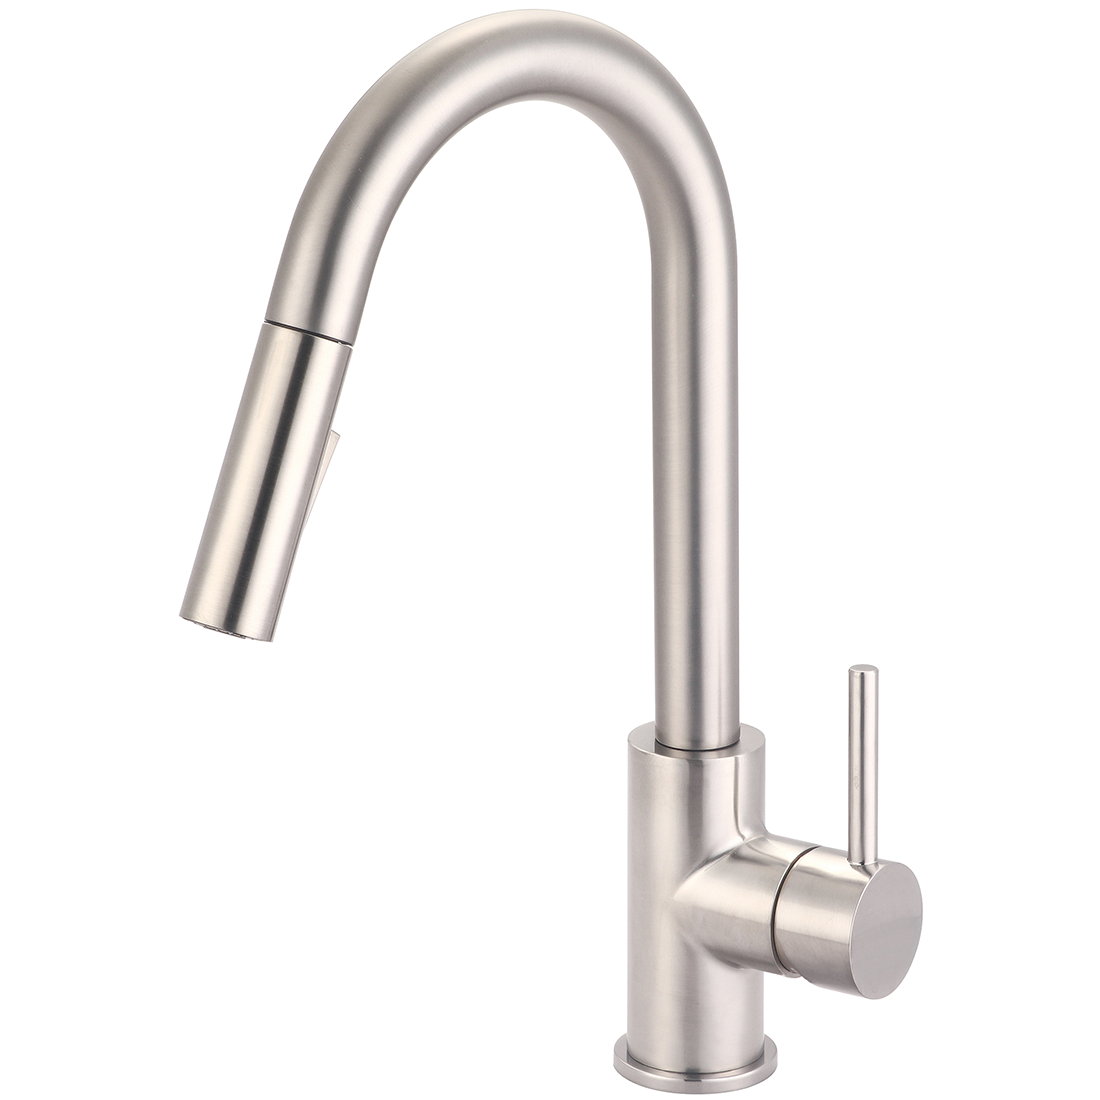 i2v Olympia Single Handle Pull-Down Kitchen Faucet Model# K-5080